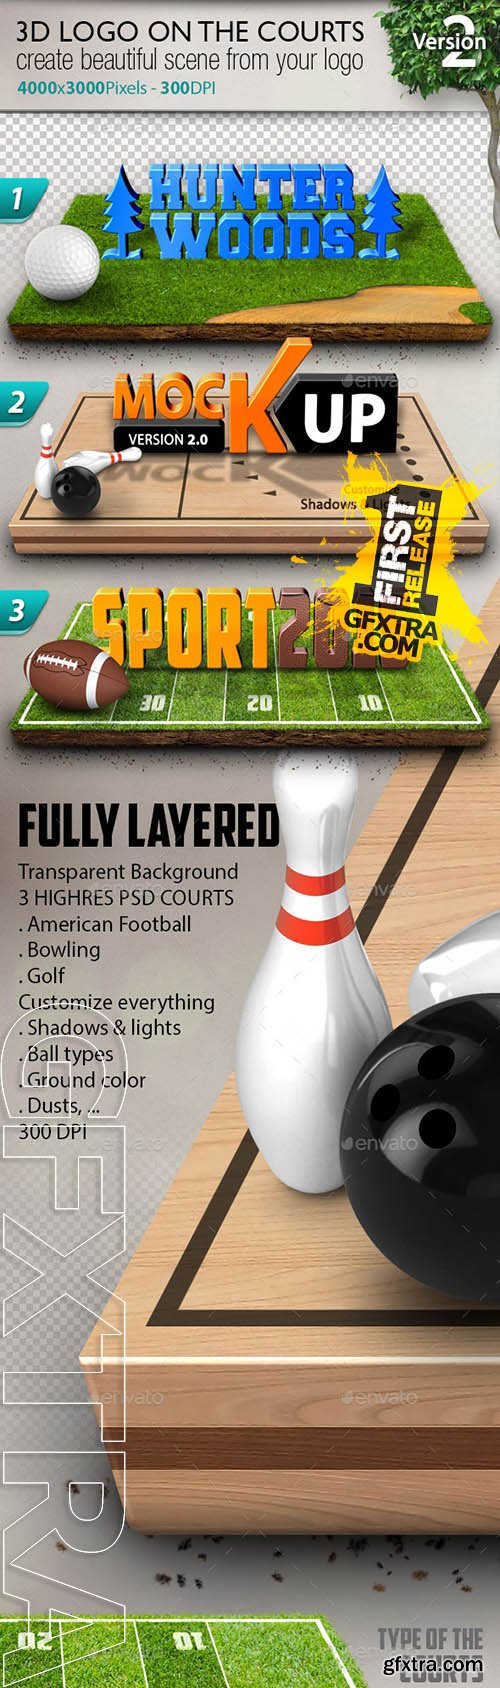 Graphicriver 3D Logos on the Courts Mockup Vol.2 10436247